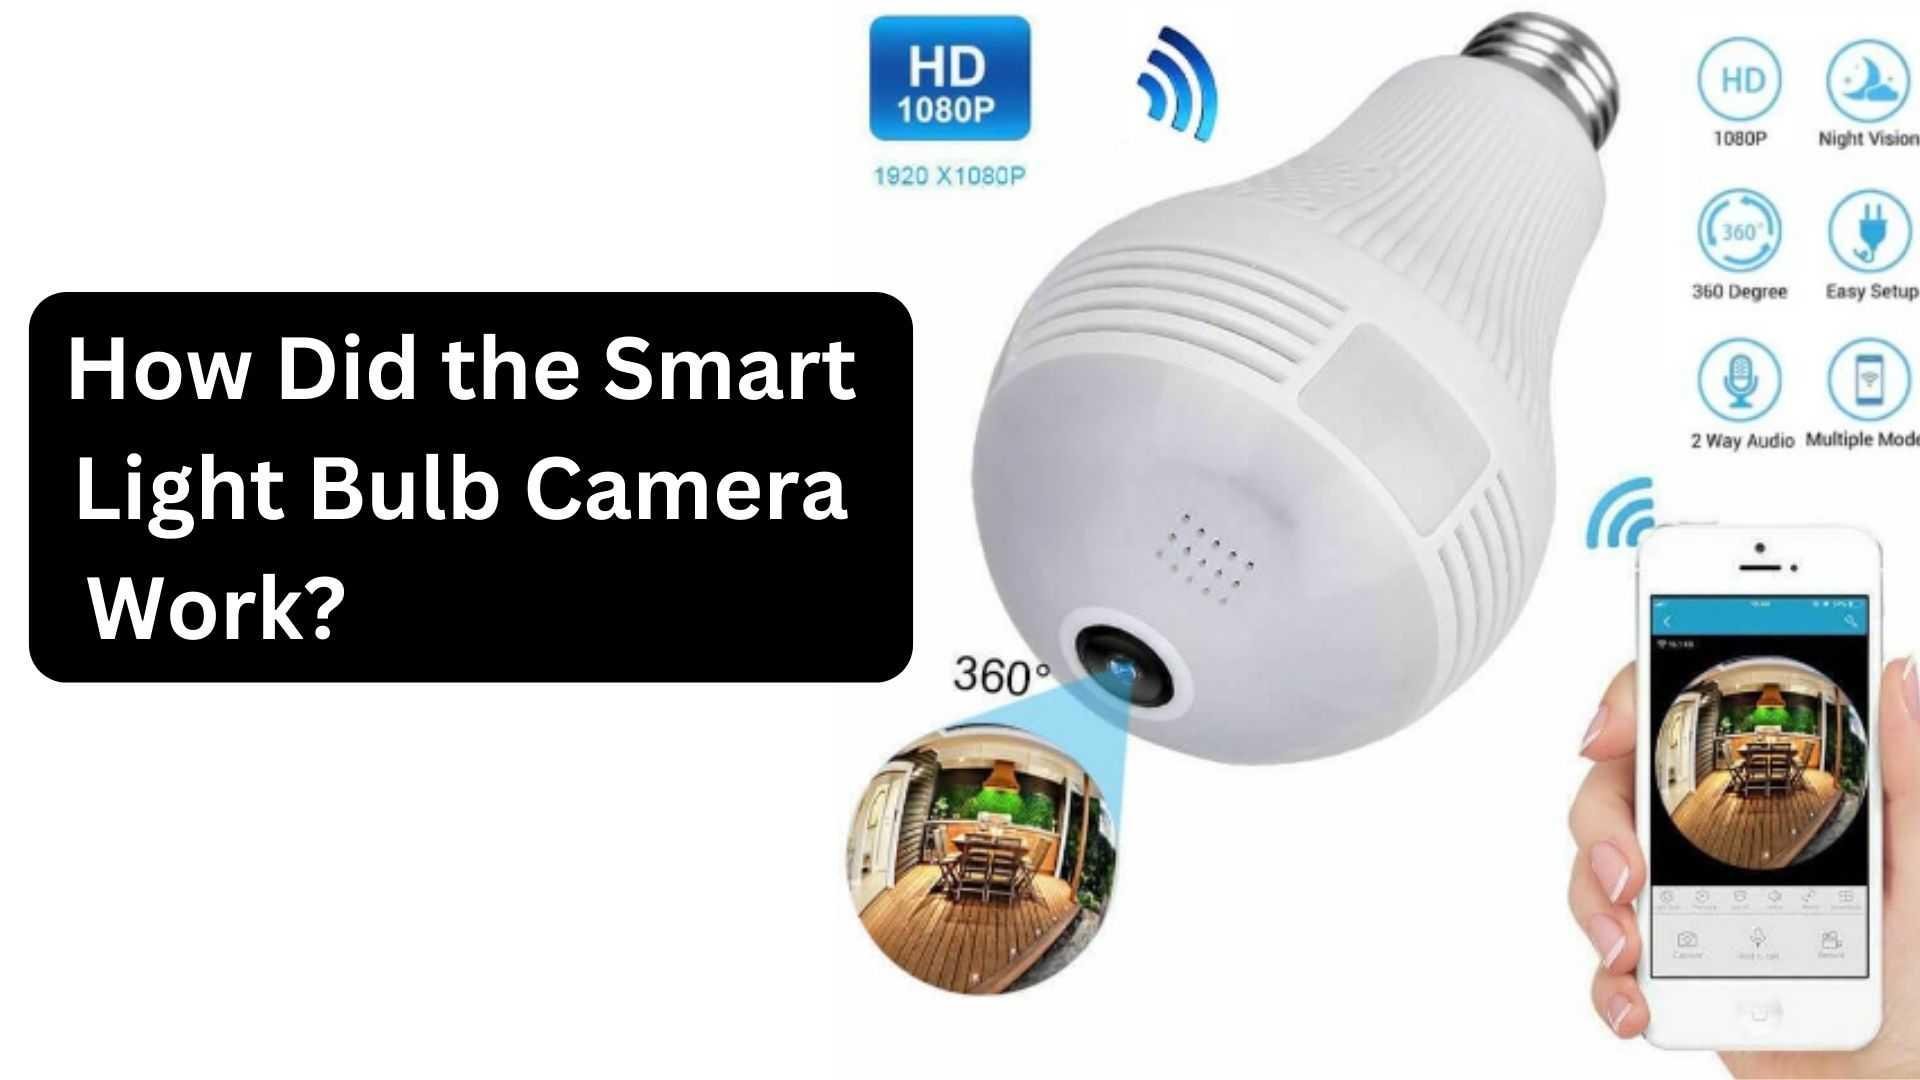 How Did the Smart Light Bulb Camera Work?